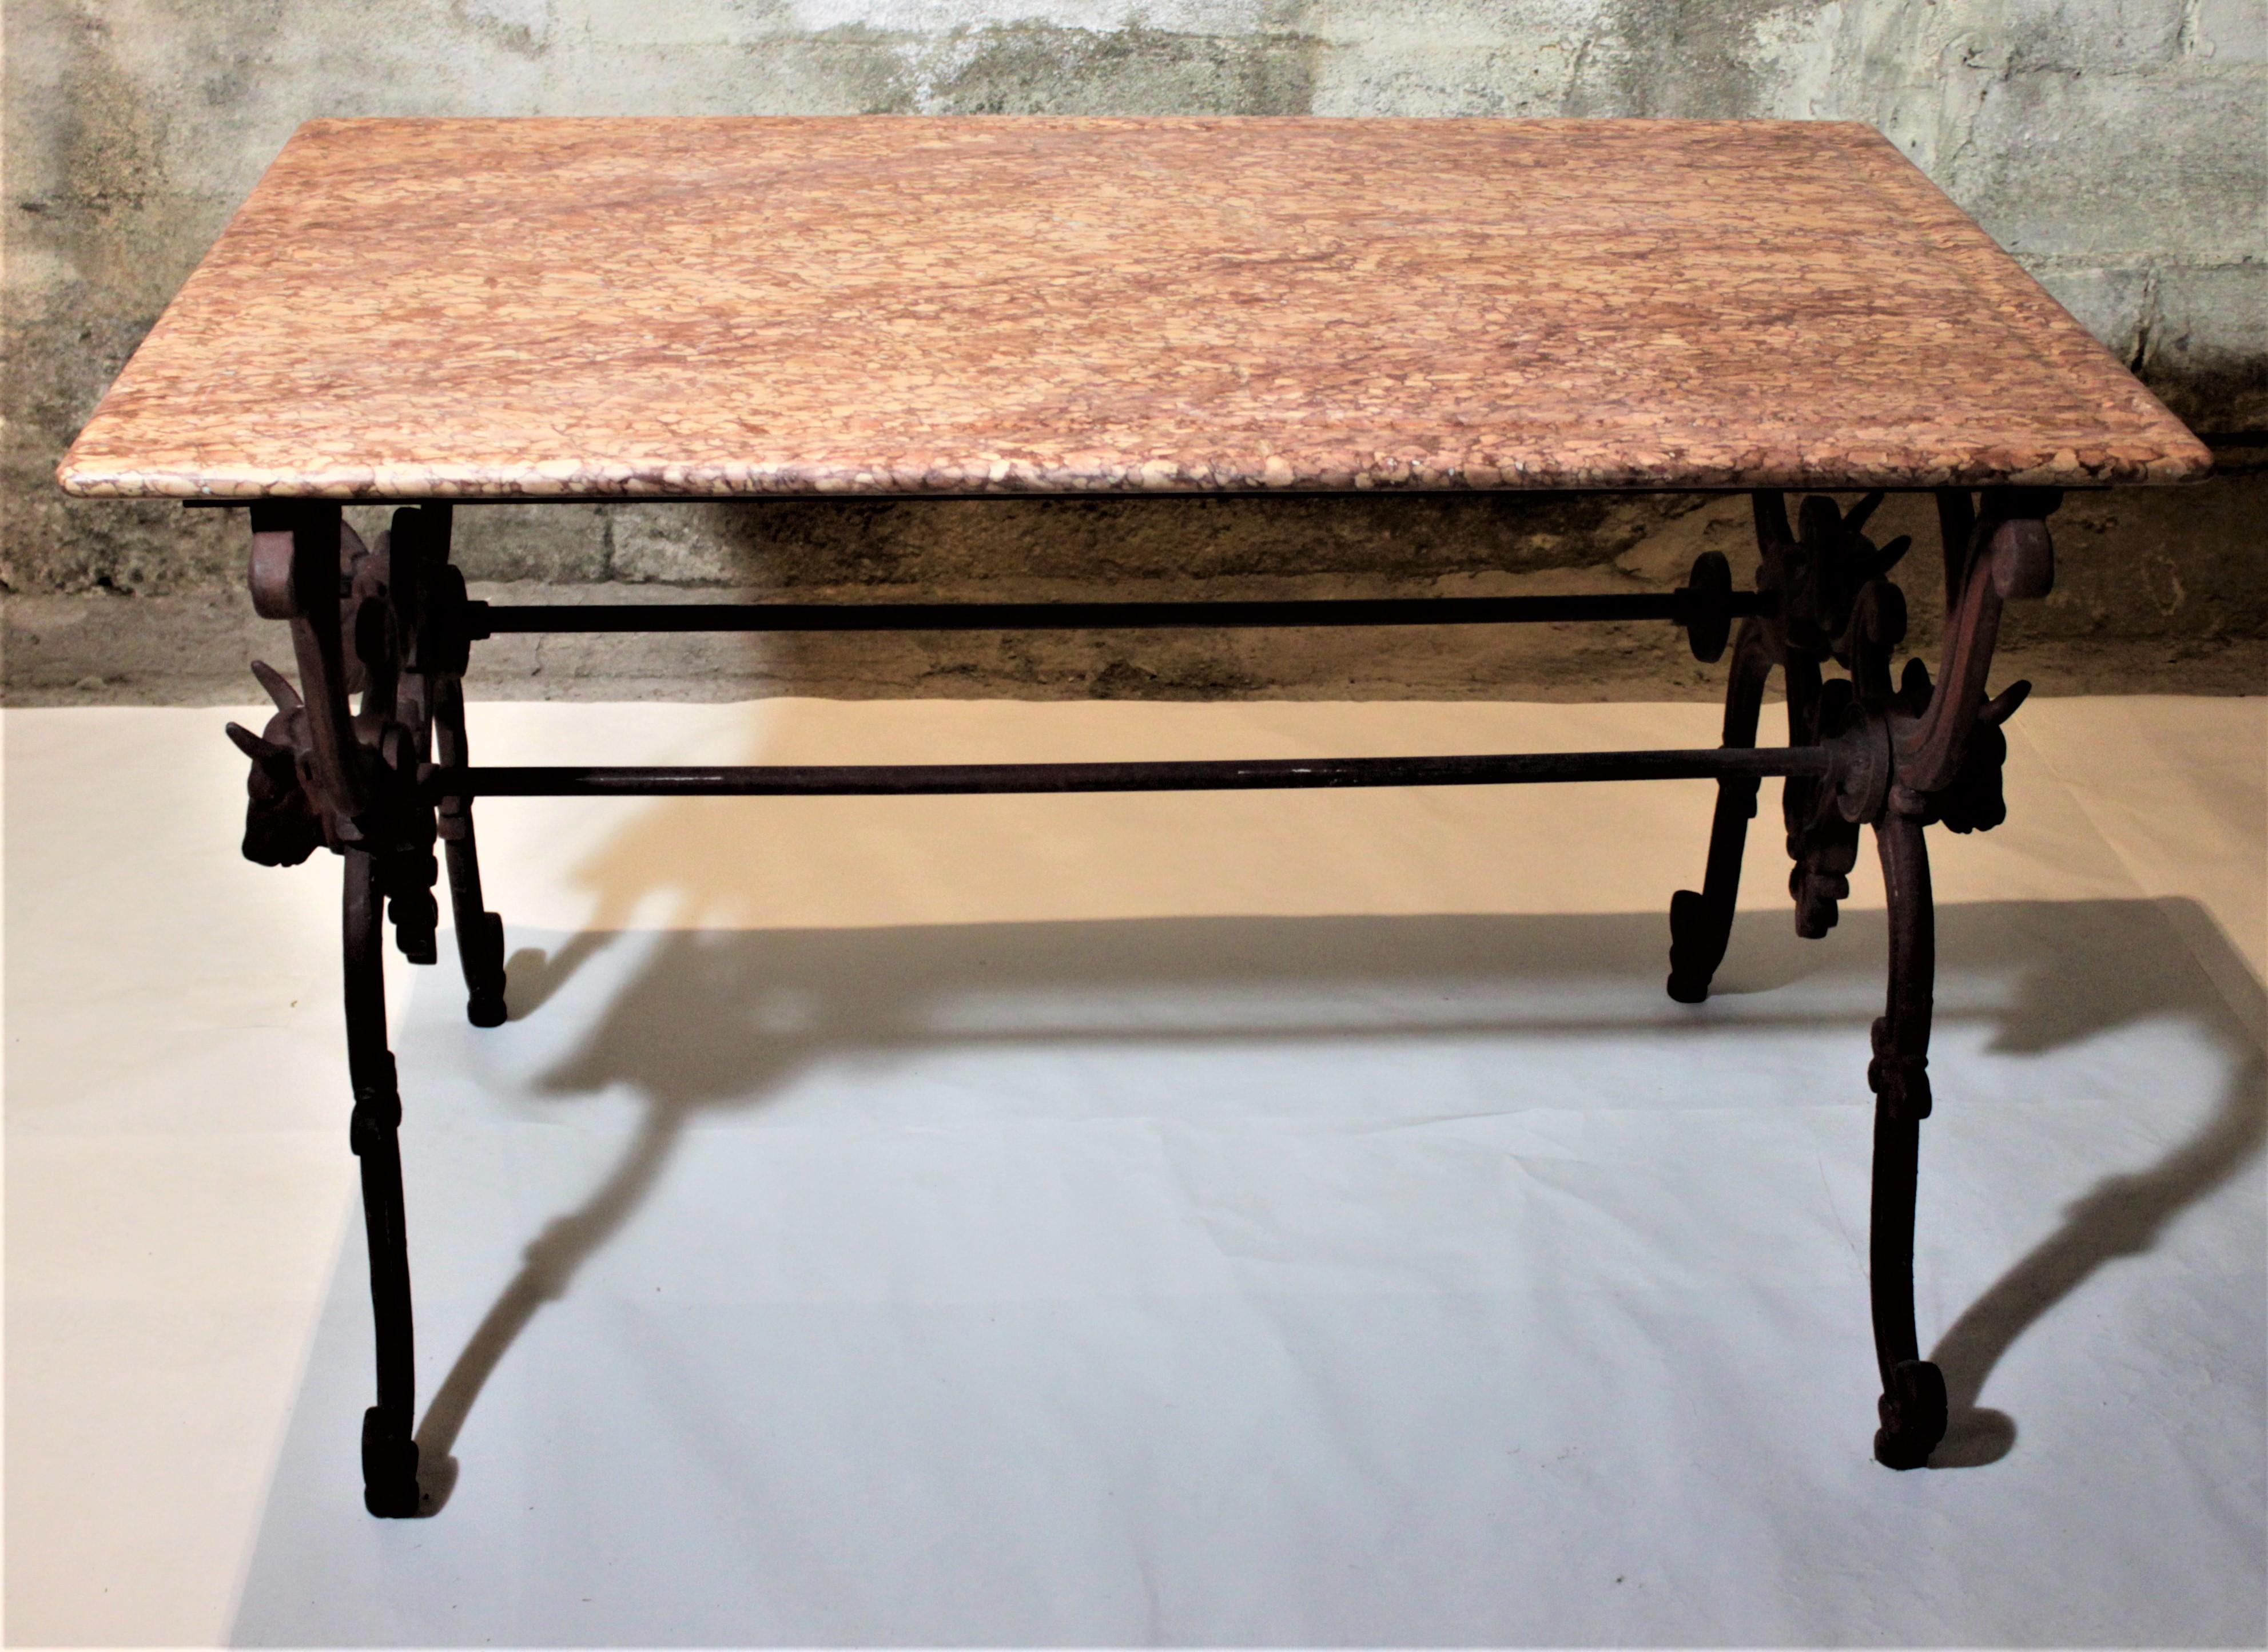 This antique French cast iron butcher's or conservatory marble-topped table was made in the late 19th century in the Victorian style. The base is very ornately cast with scrolled decoration and two figural cow heads on each of the trestle side